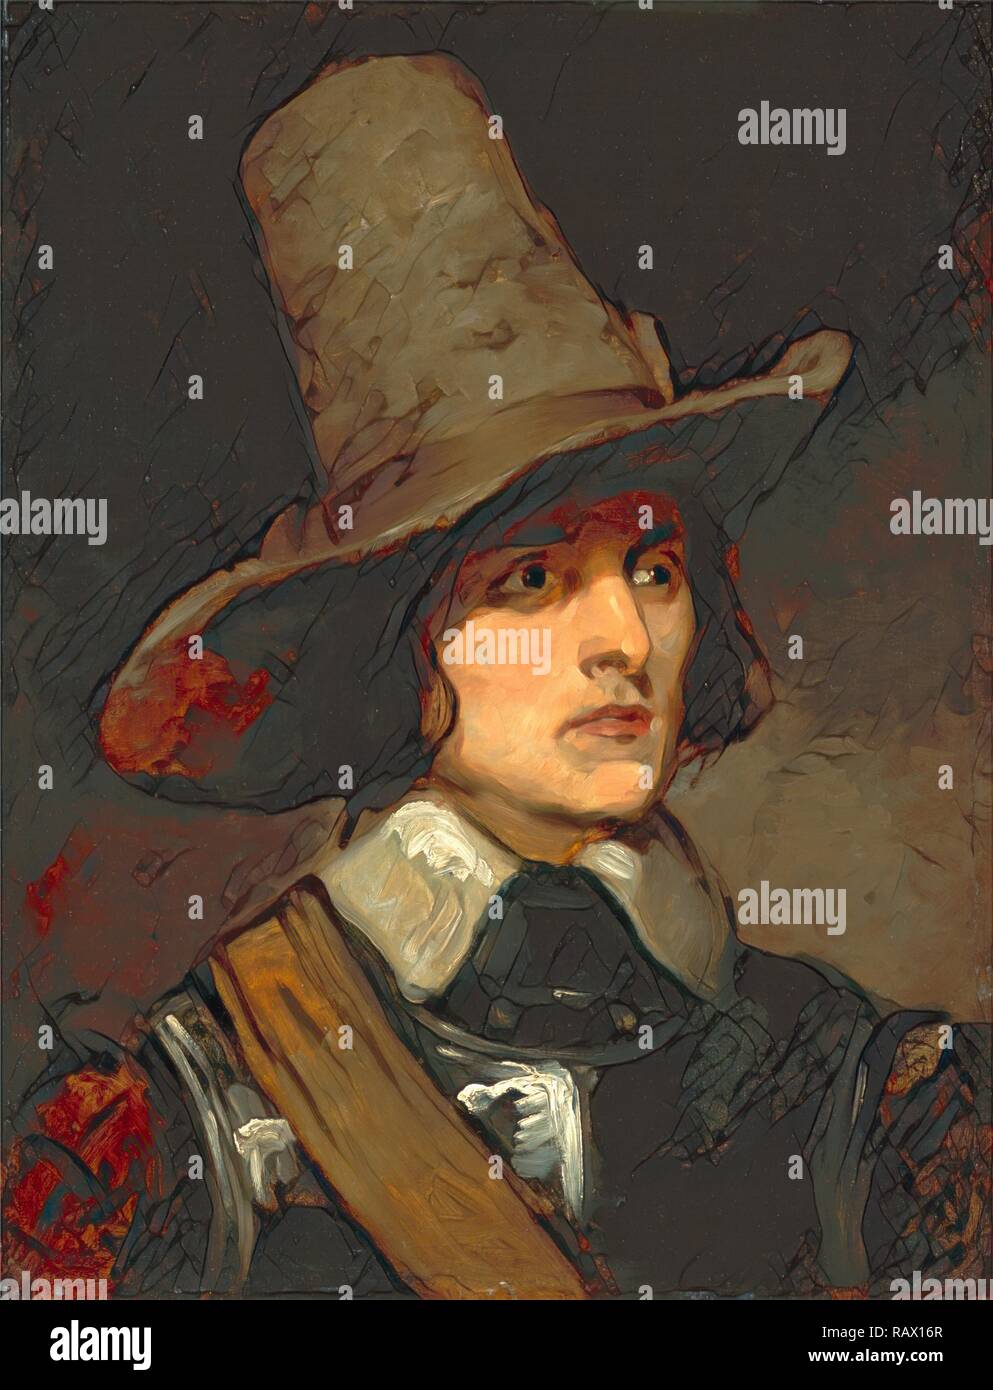 Augustus Egg, Richard Dadd, 1817-1886, British. Reimagined by Gibon. Classic art with a modern twist reimagined Stock Photo